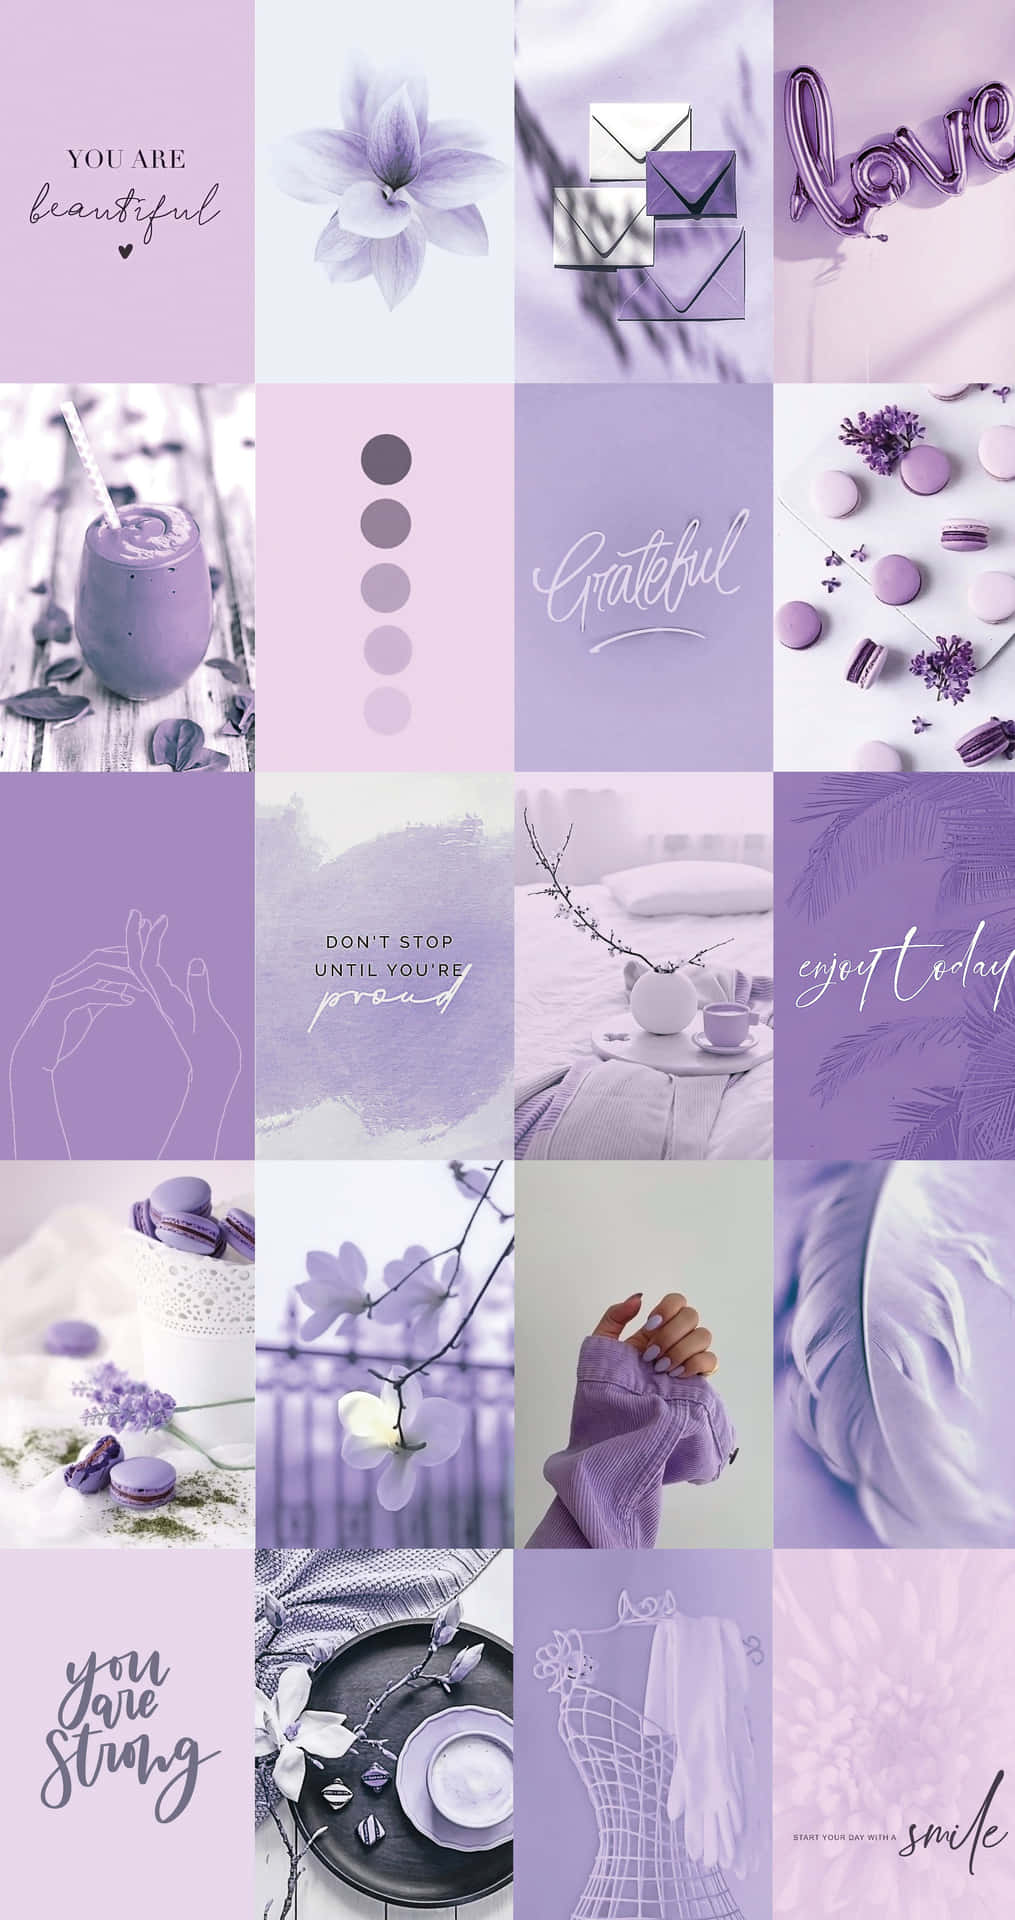 A gorgeous aesthetic collage with multiple layers of shades of purple. Wallpaper